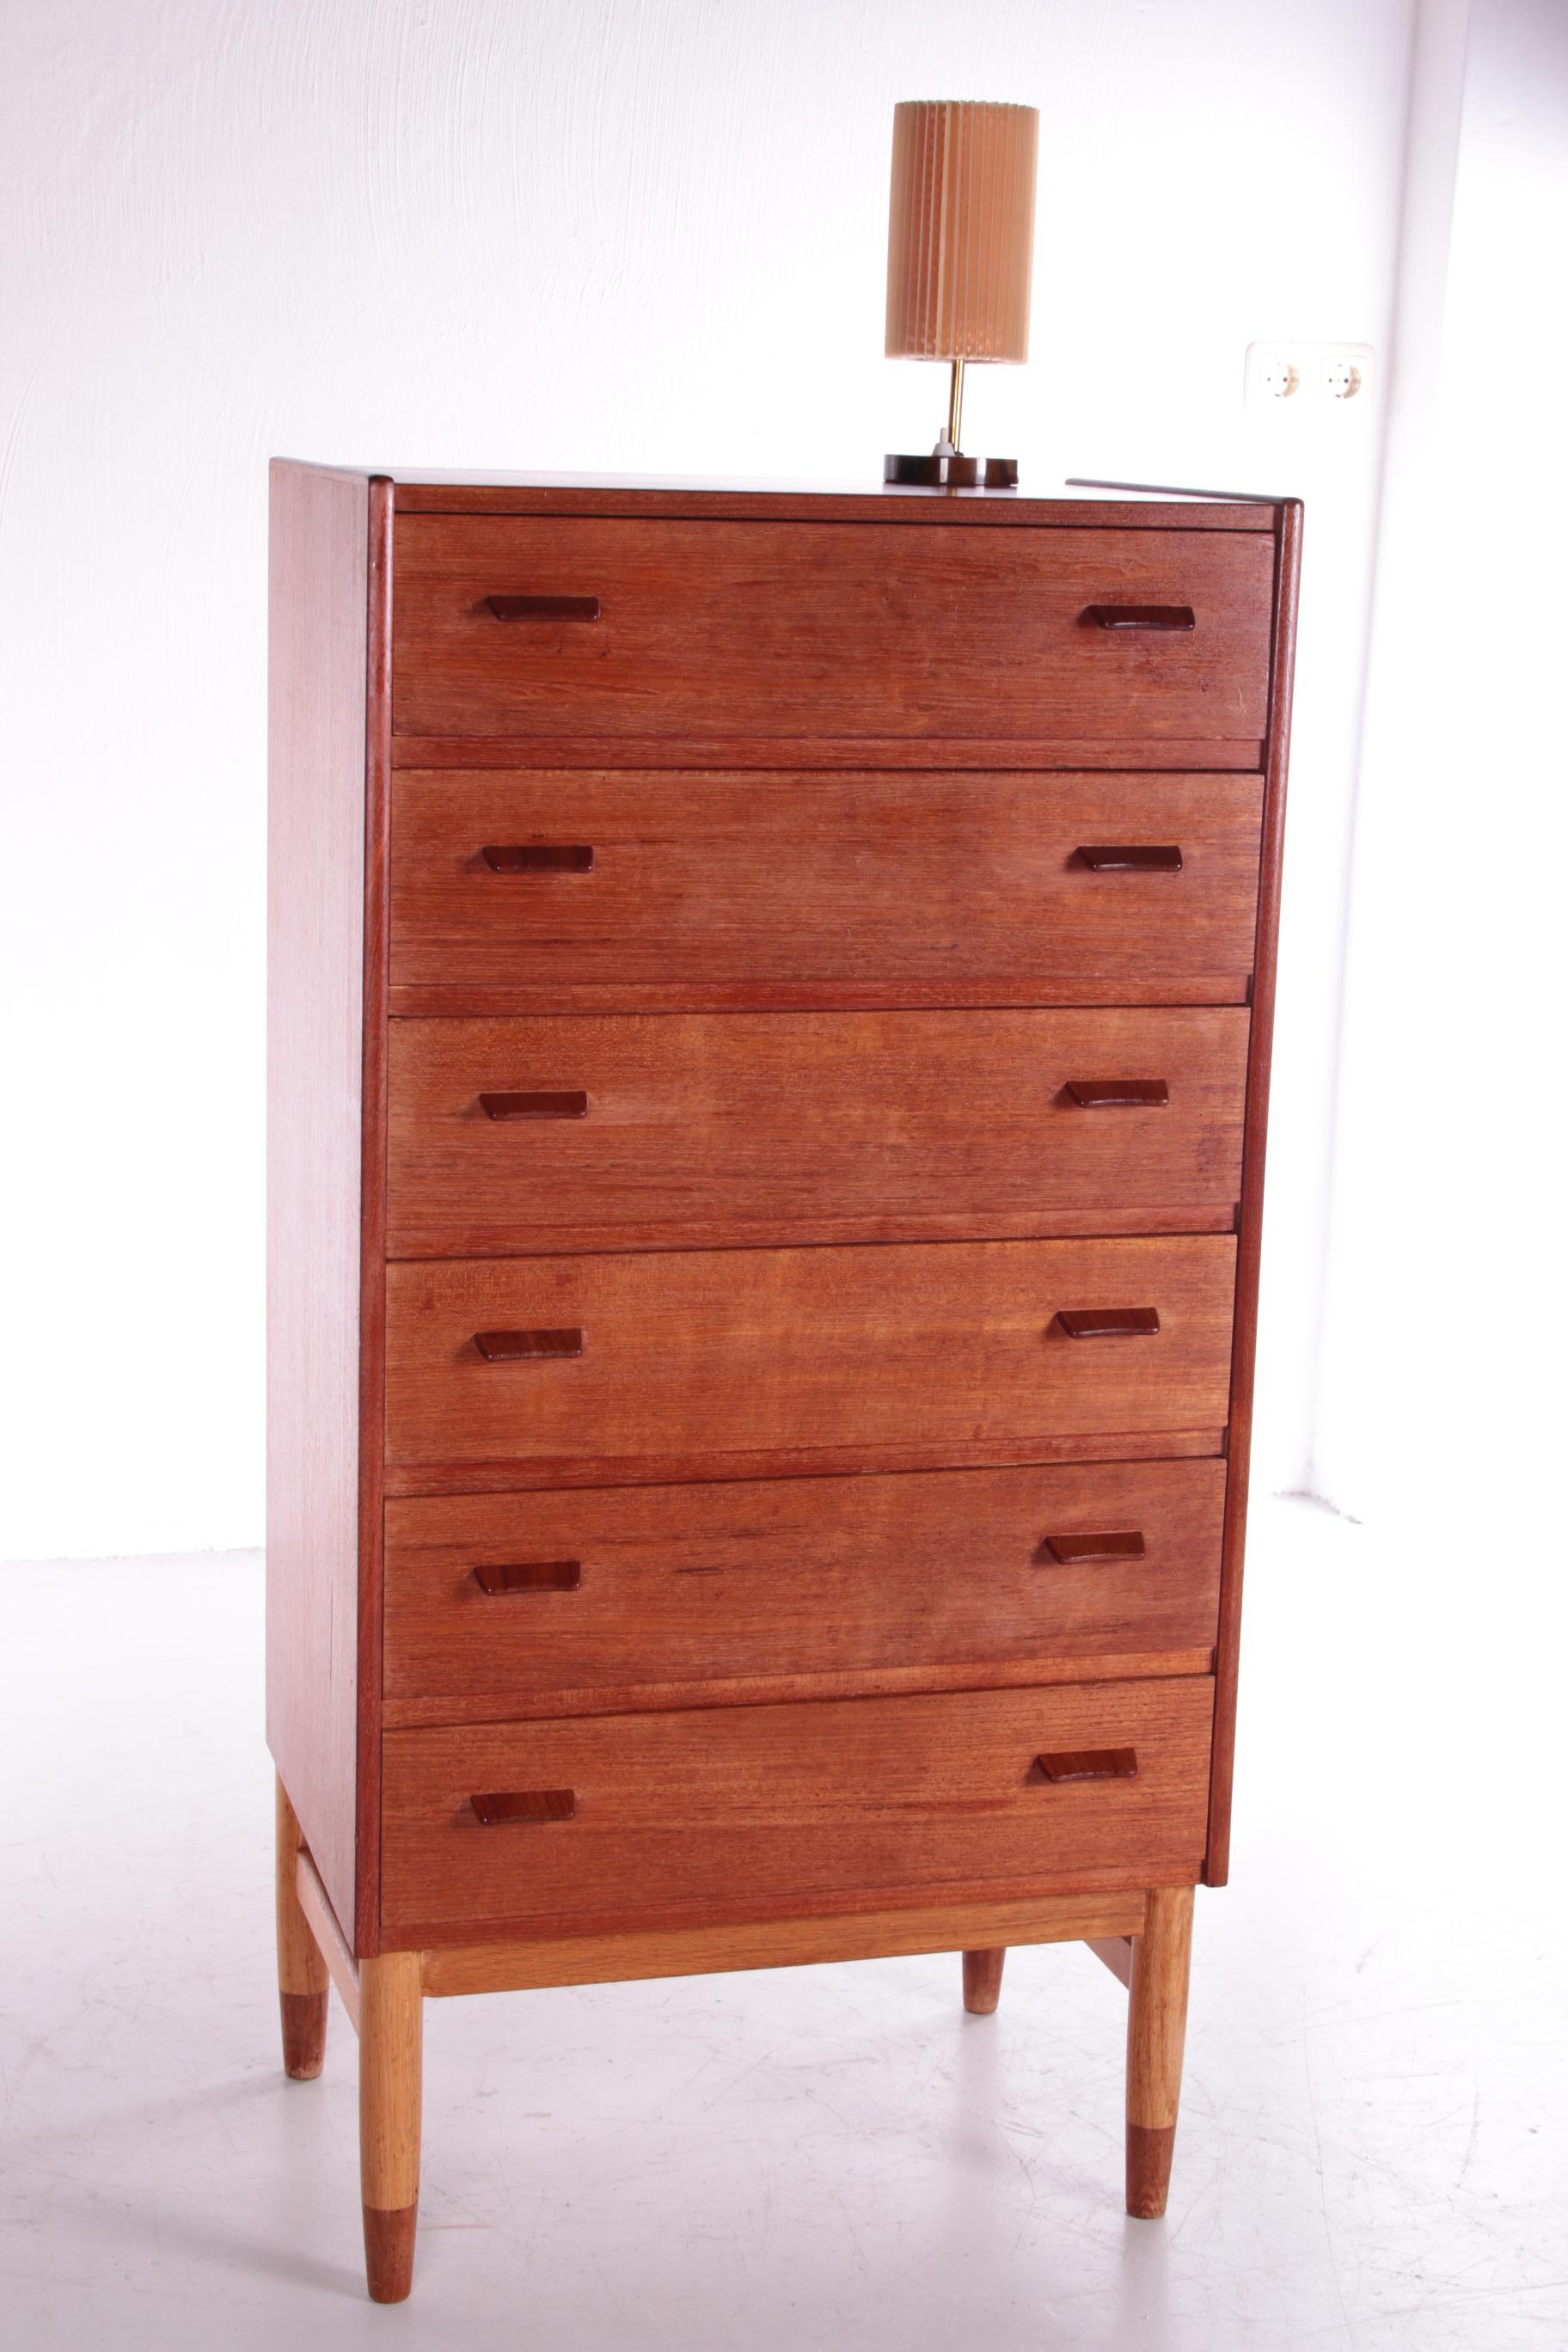 Very nice top quality chest of drawers made of teak wood with six spacious drawers.

This chest of drawers is a design by Poul Volther and it was made by Munch Mobler in Denmark.

This Danish chest of drawers comes from the early sixties.